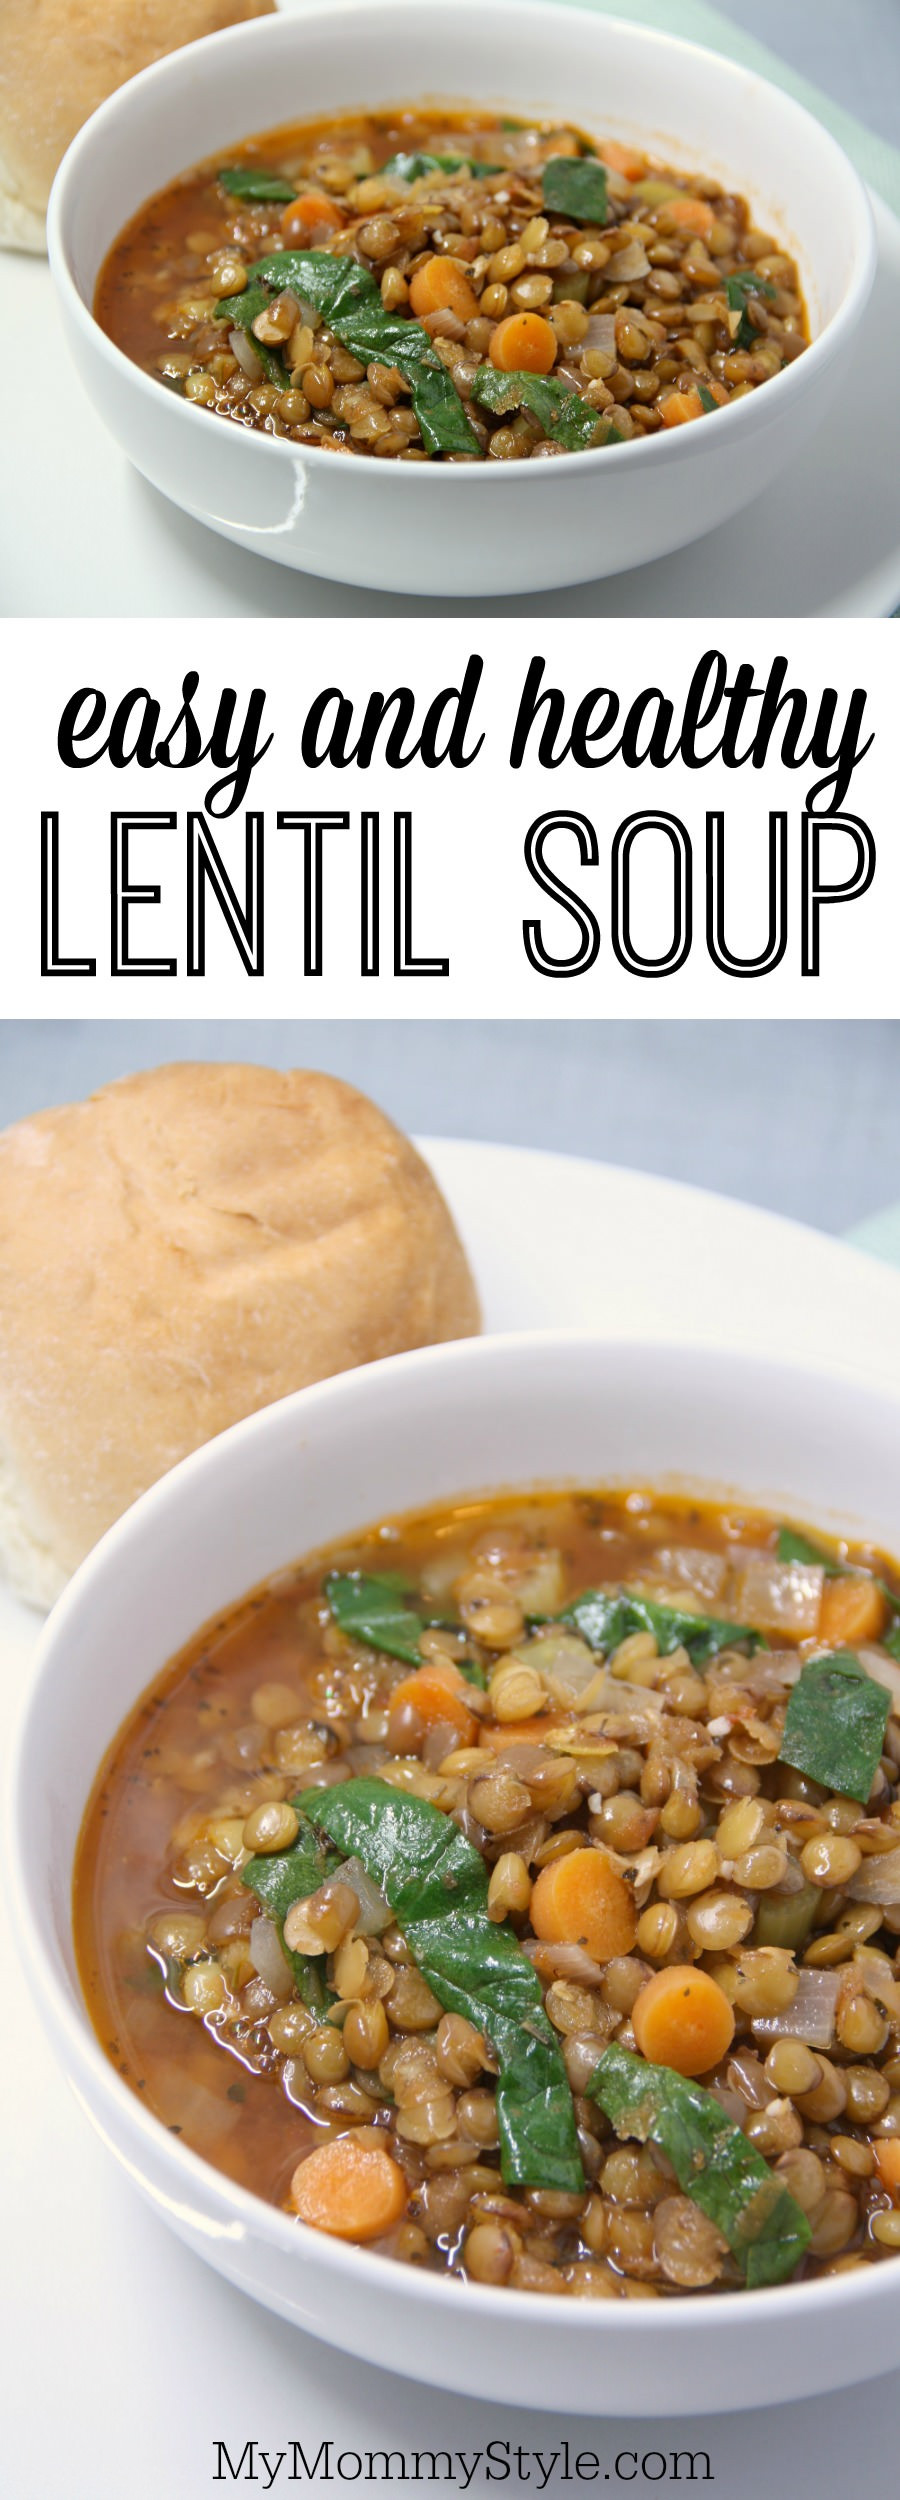 Easy Healthy Gluten Free Recipes
 Easy and Healthy Lentil Soup My Mommy Style